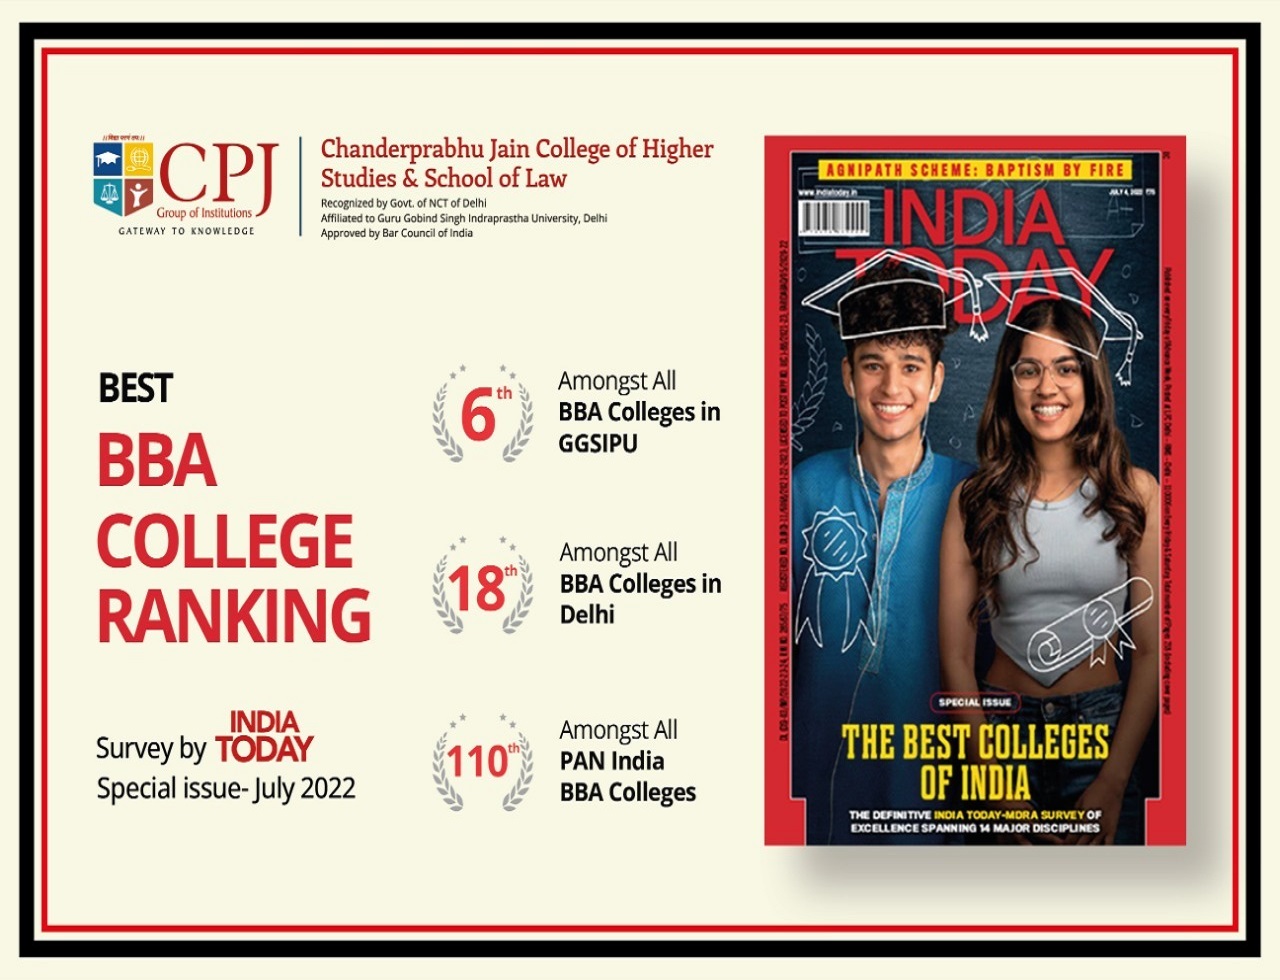 India Today Survey in the Category of Best BBA Colleges